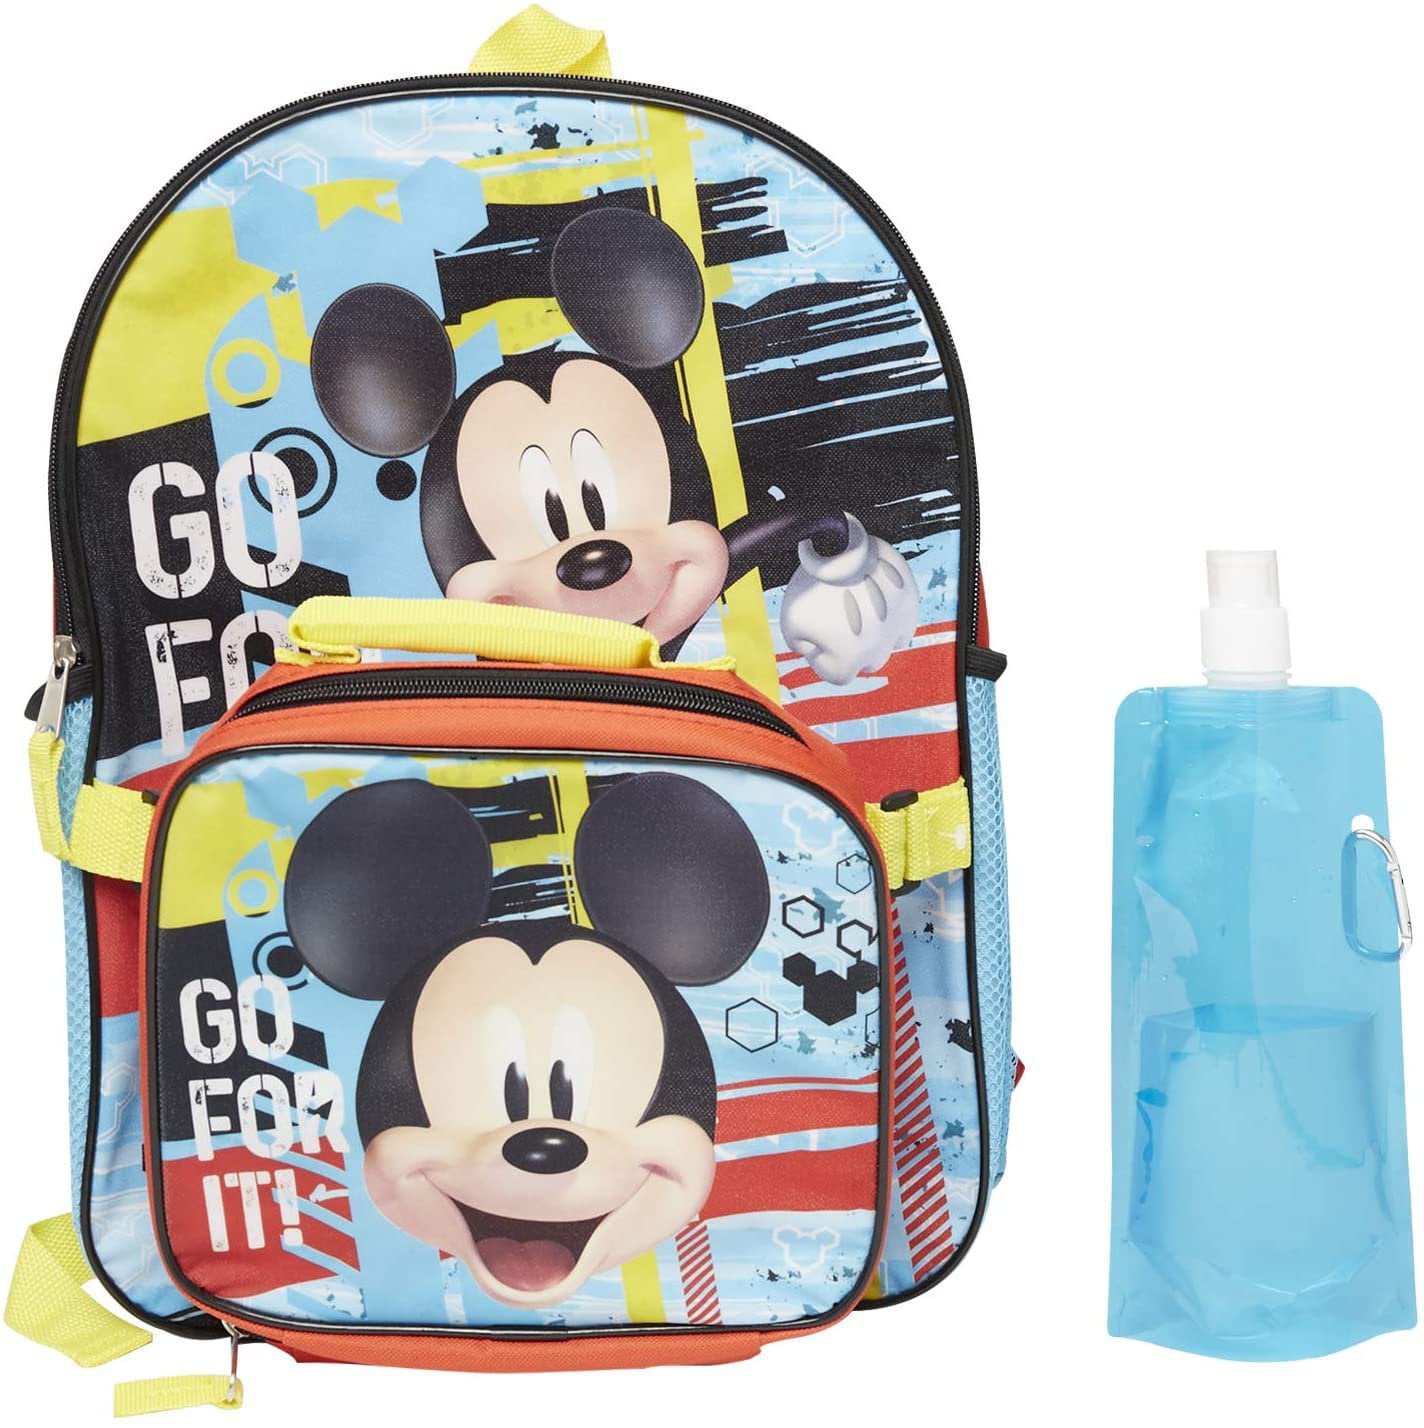 Disney Mickey Mouse Clubhouse 3 Piece School Lunch Bag Set Bottle & Snack Pot 